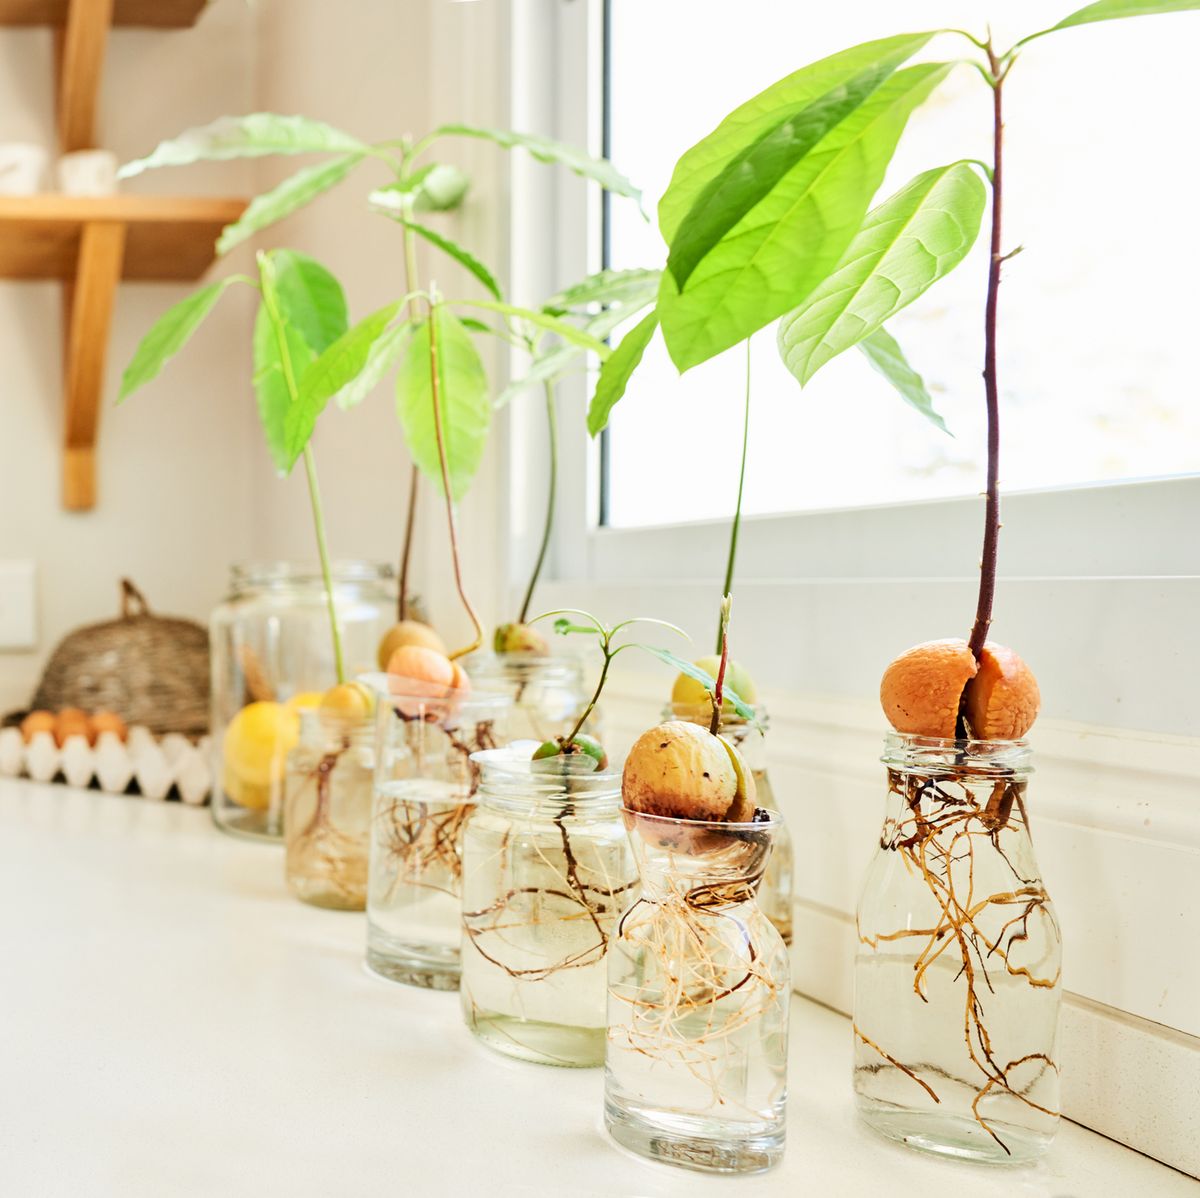 How to Grow Avocado from Seed in Water